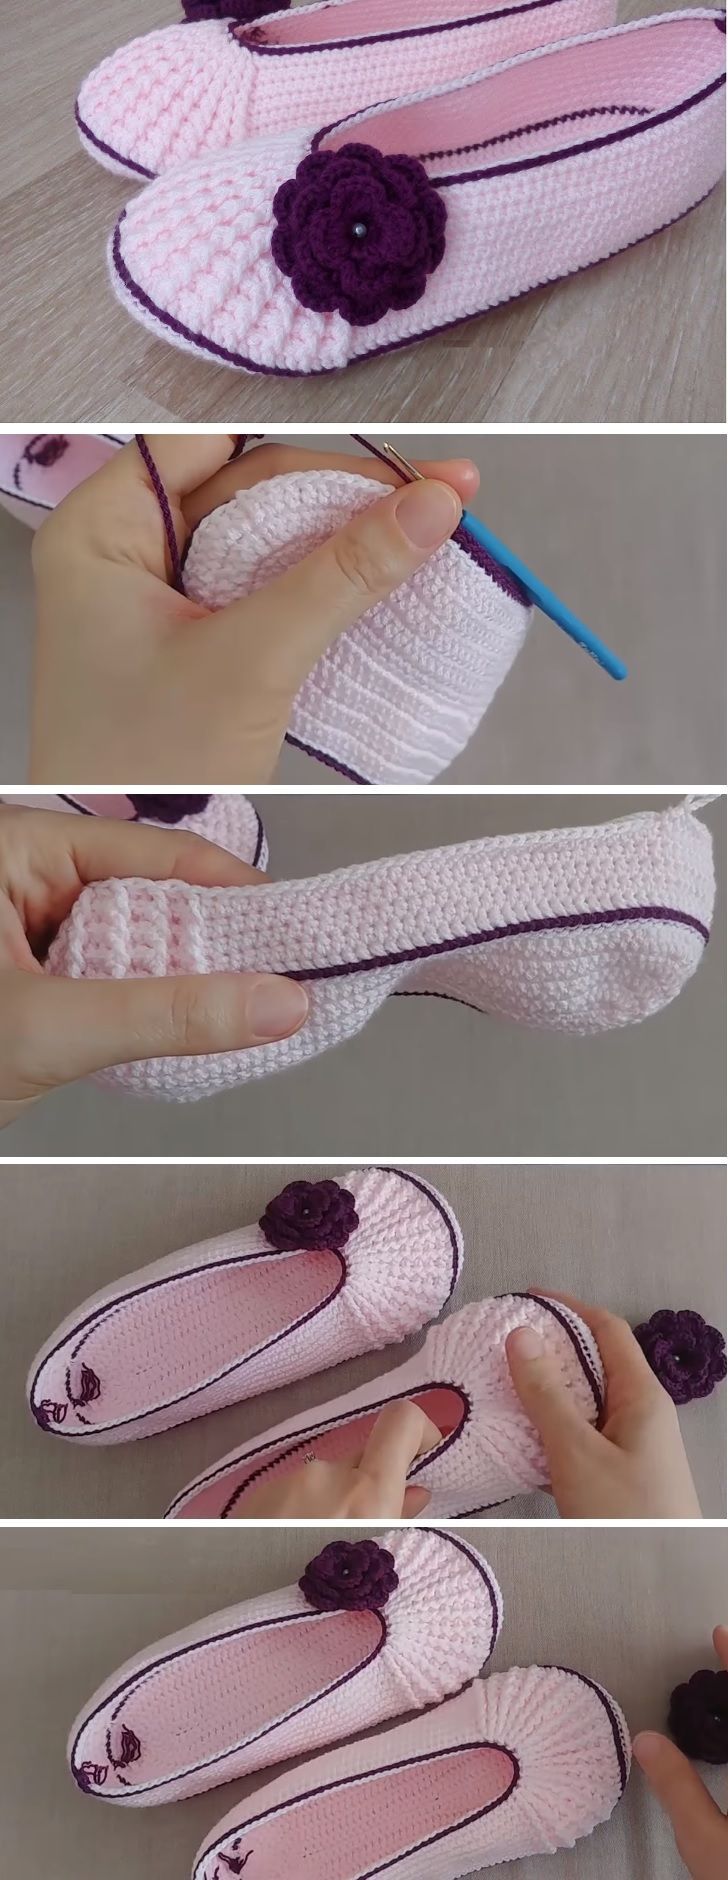 How to Crochet These Beautiful Slippers – Crochet and Knitting Patterns